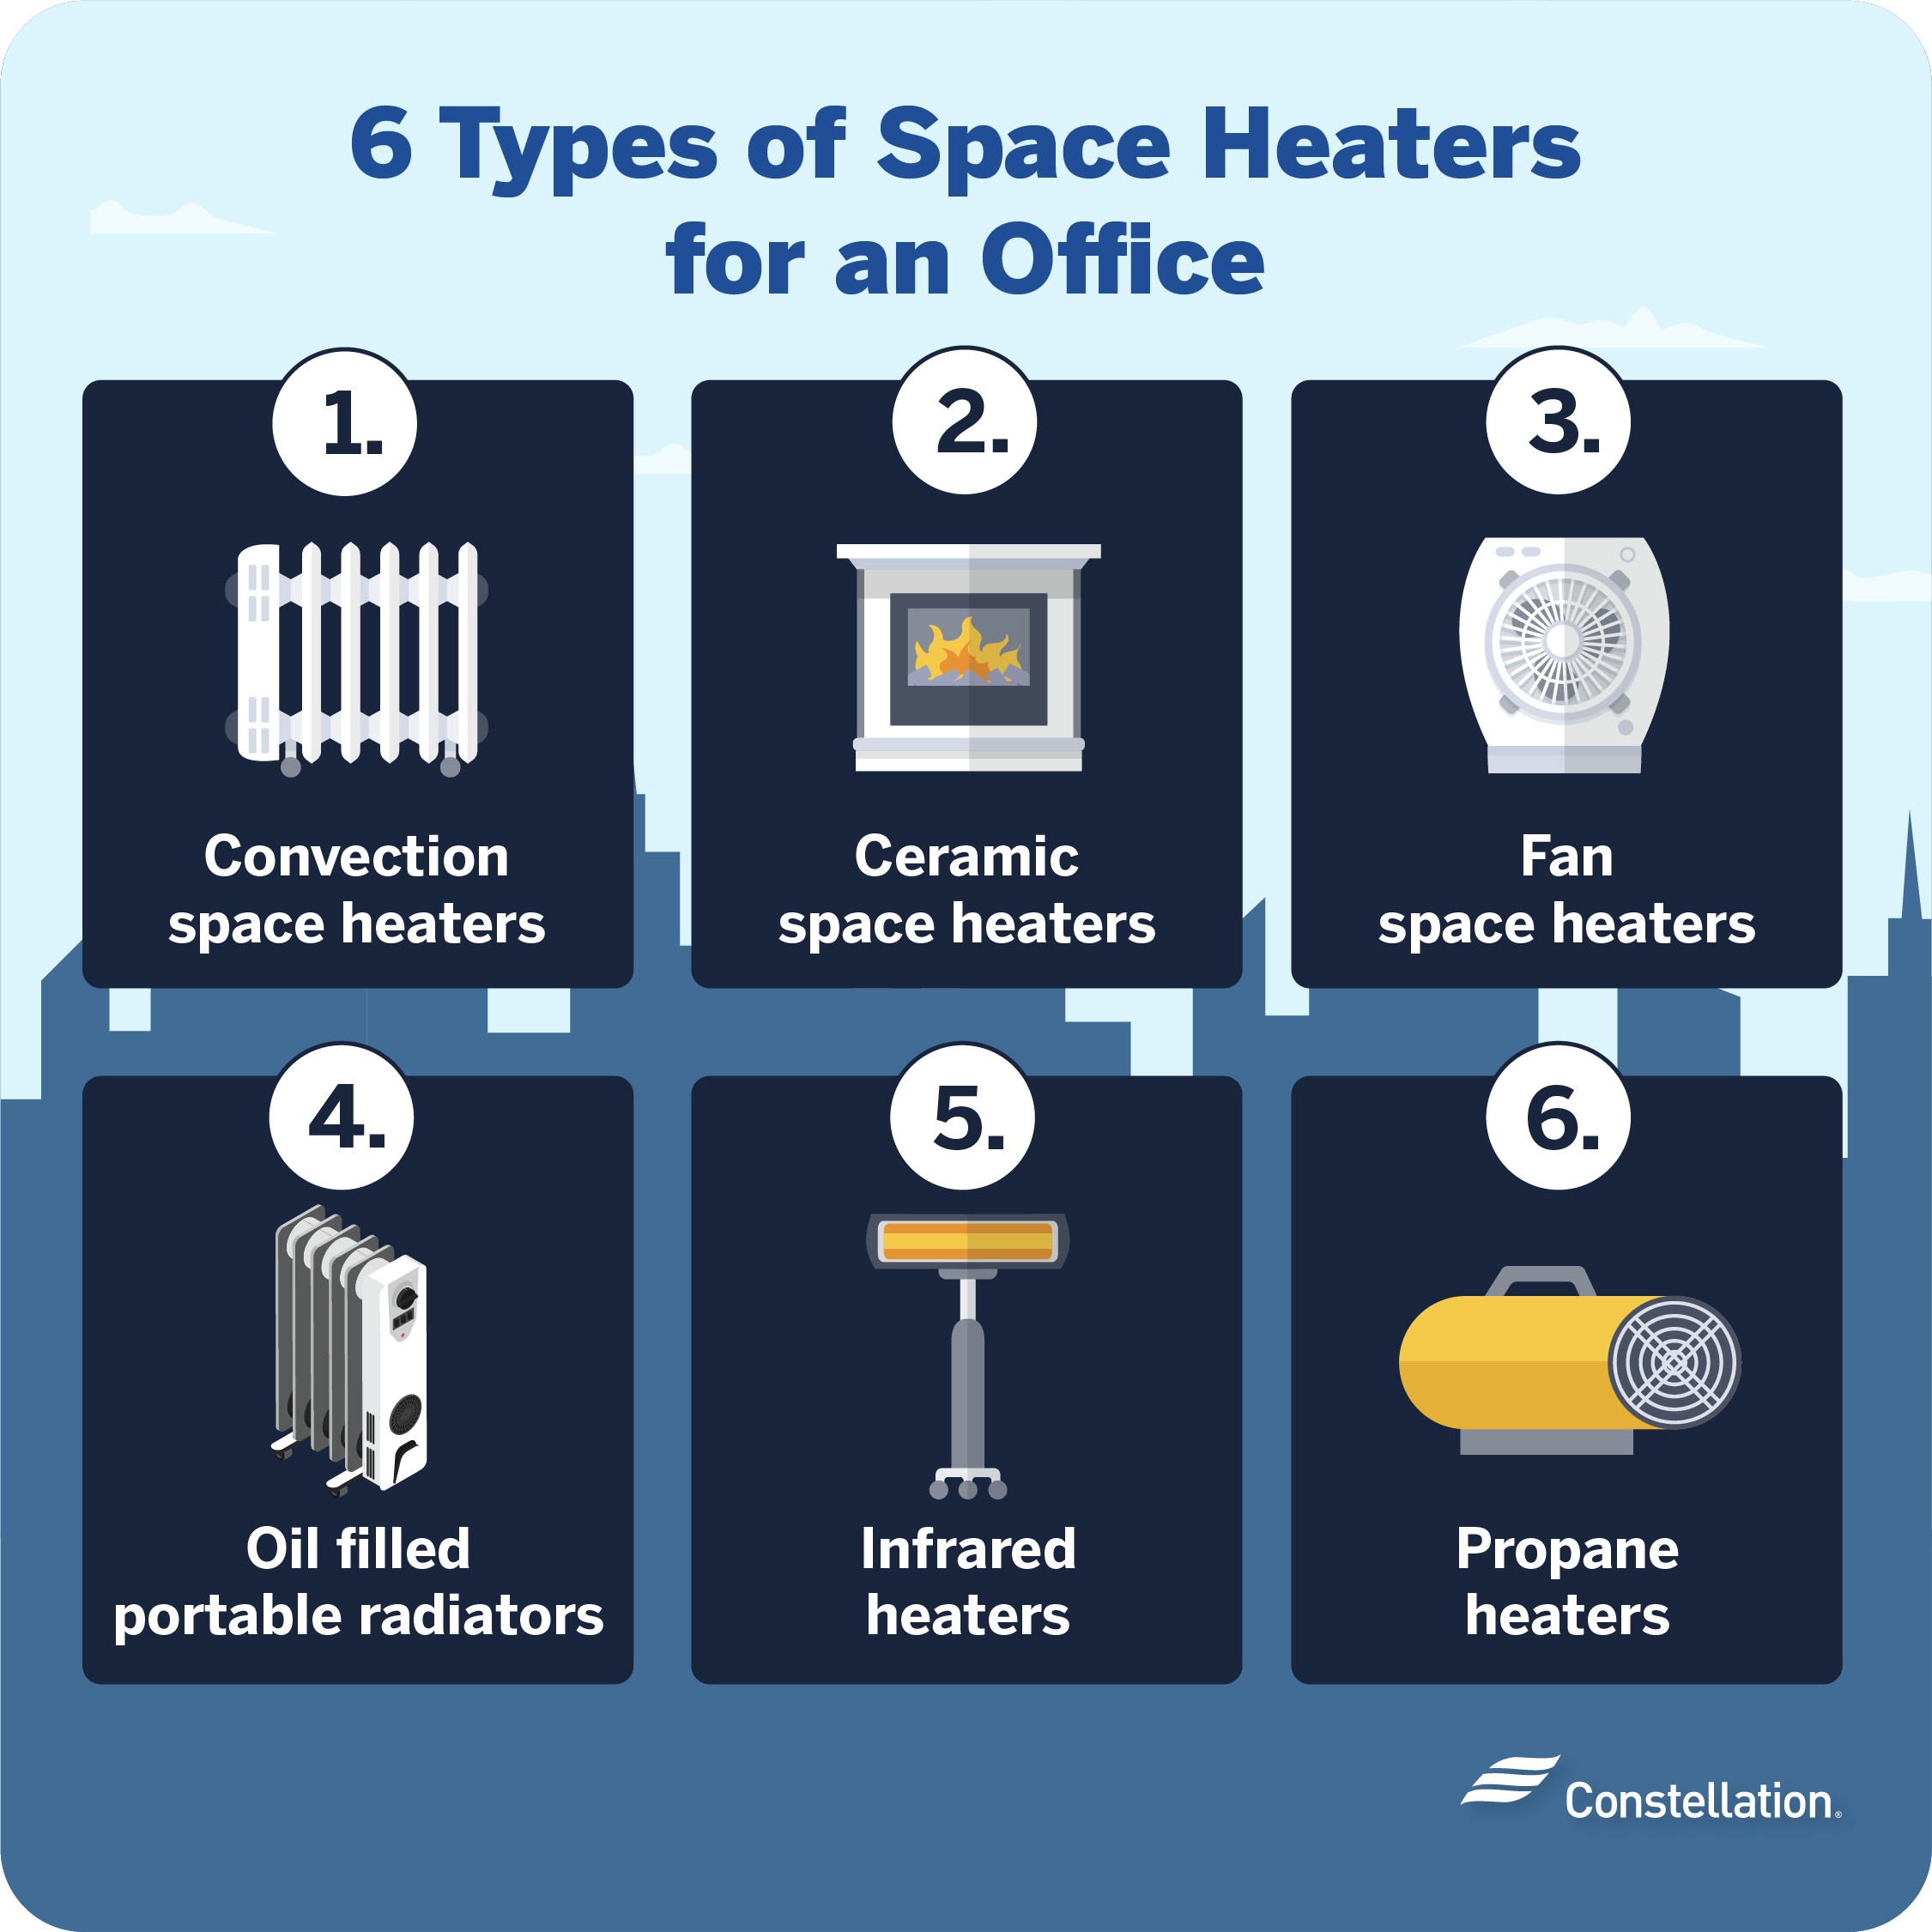 What is the best type of heater for an office?